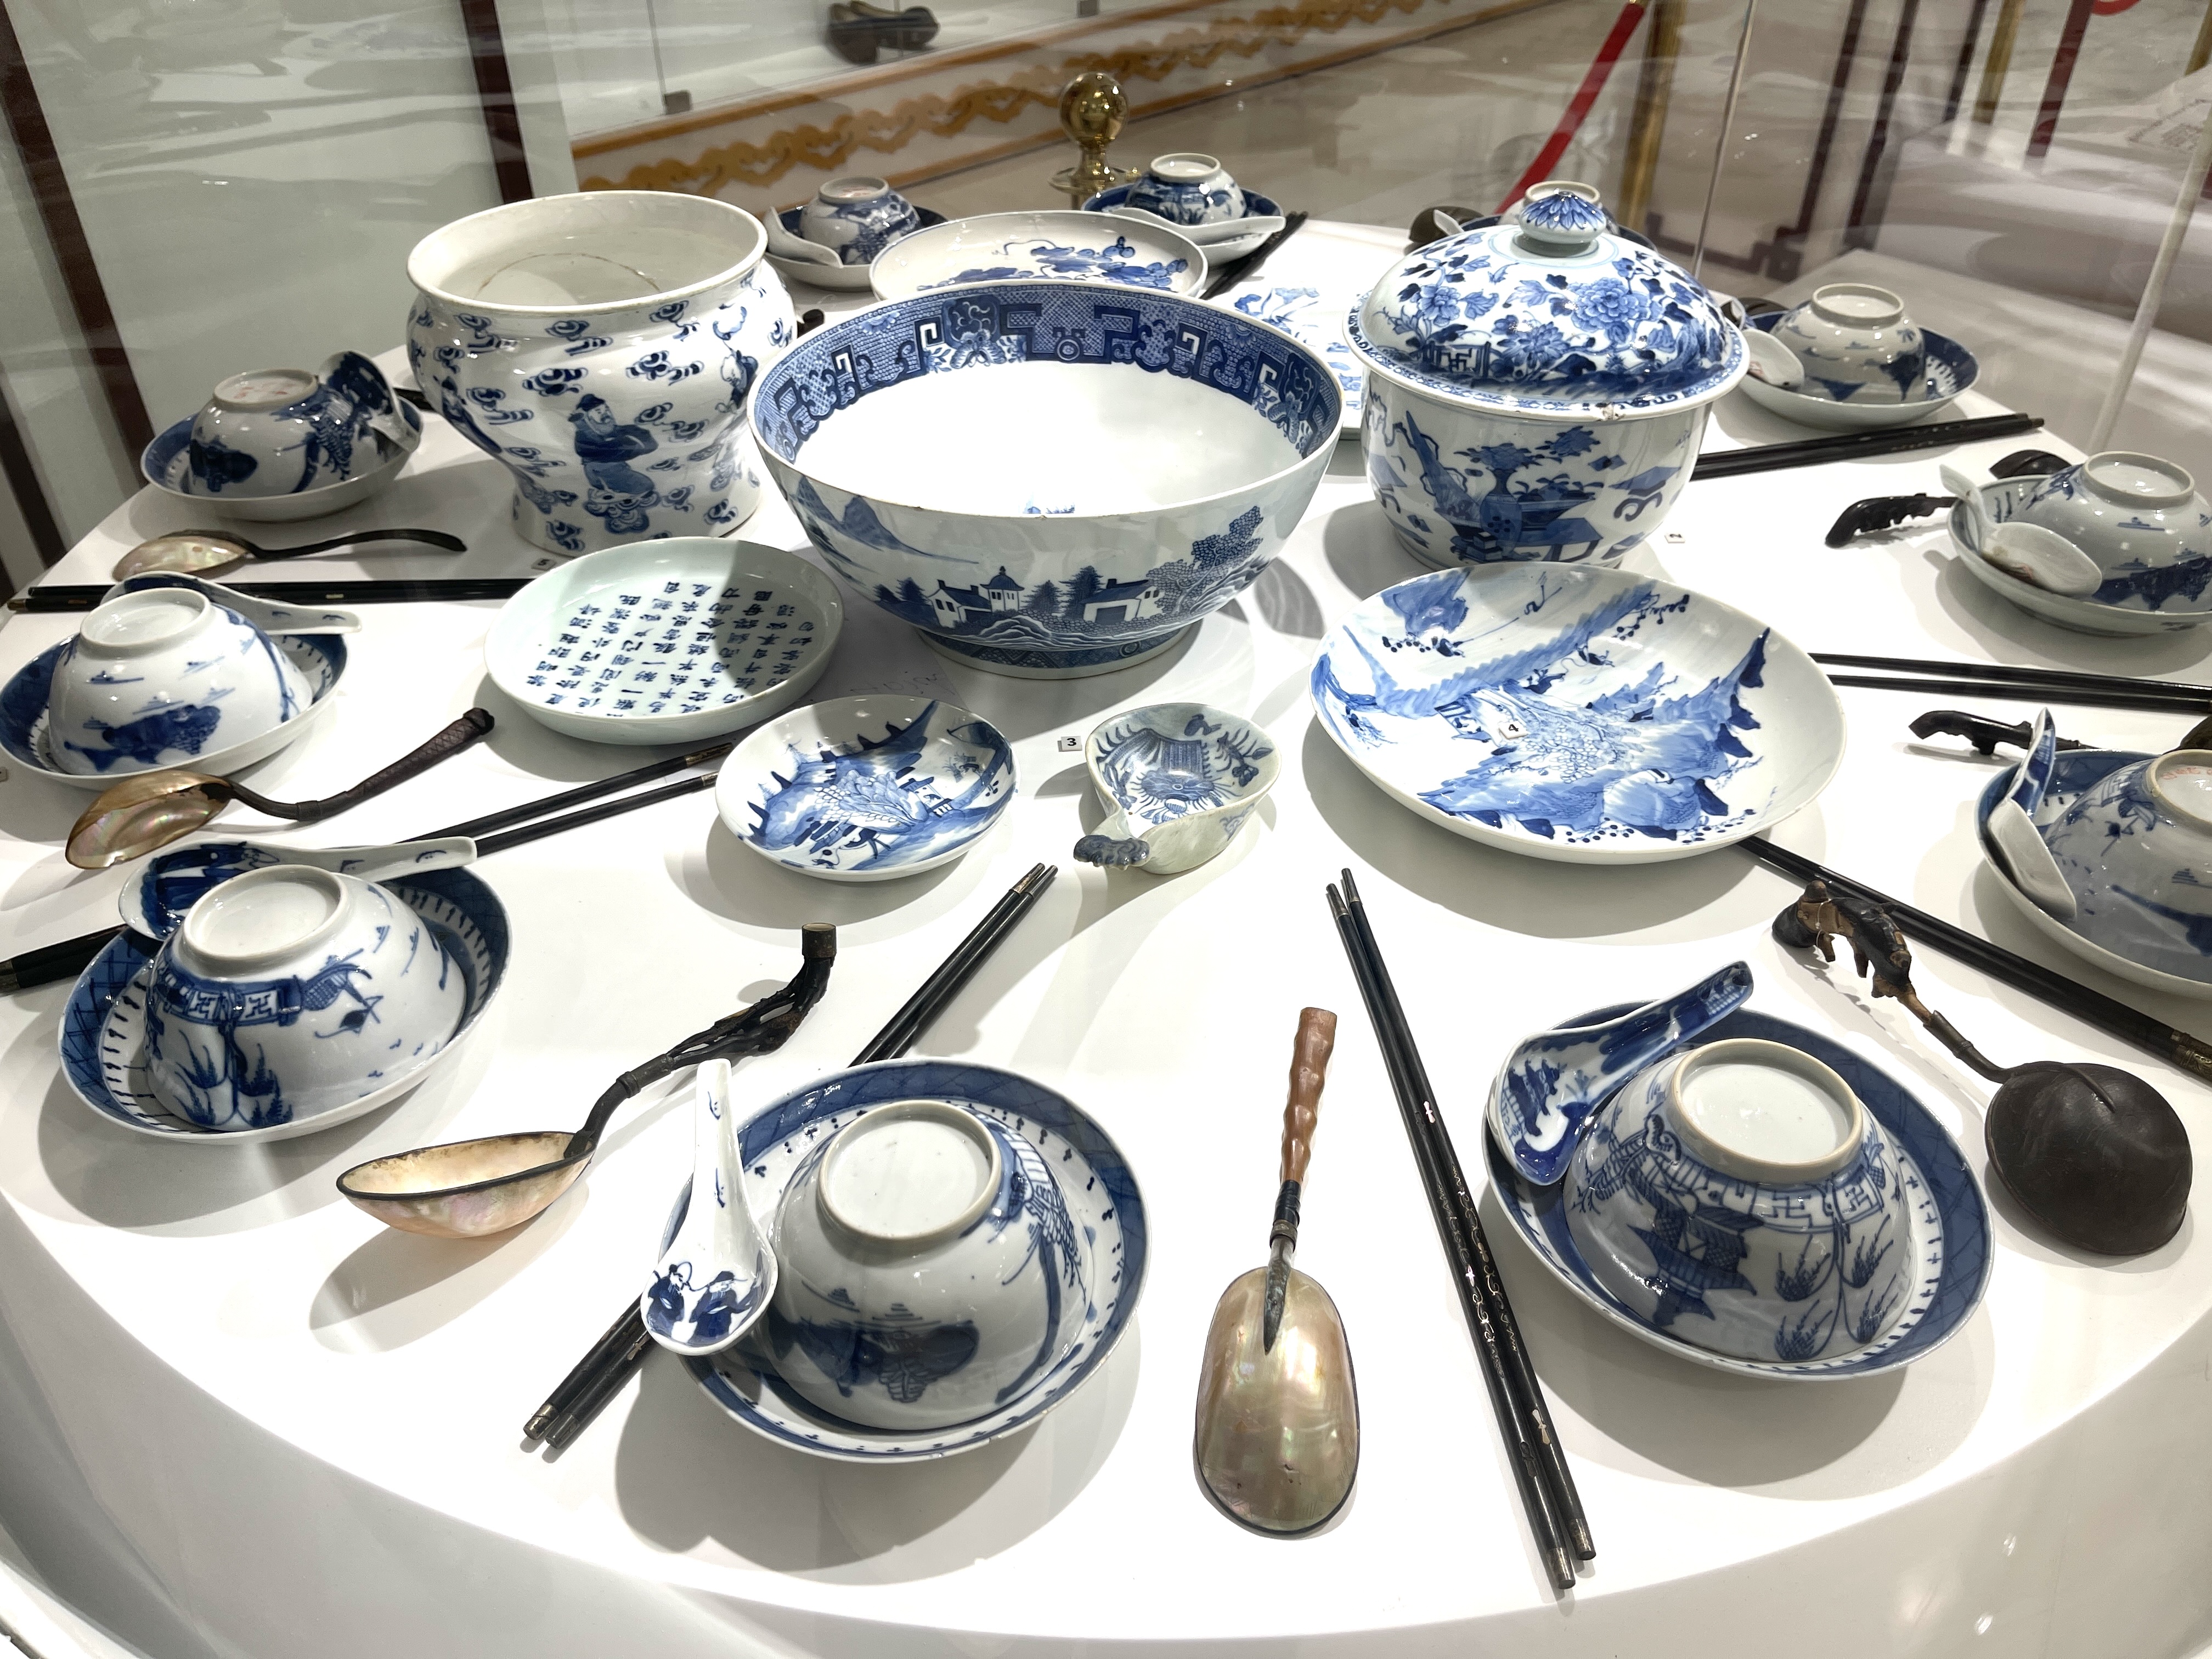 A dining utensil set from the Nguyen Dynasty is displayed at the Nguyen Dynasty Artifacts Museum. Photo: Dong Nguyen / Tuoi Tre News